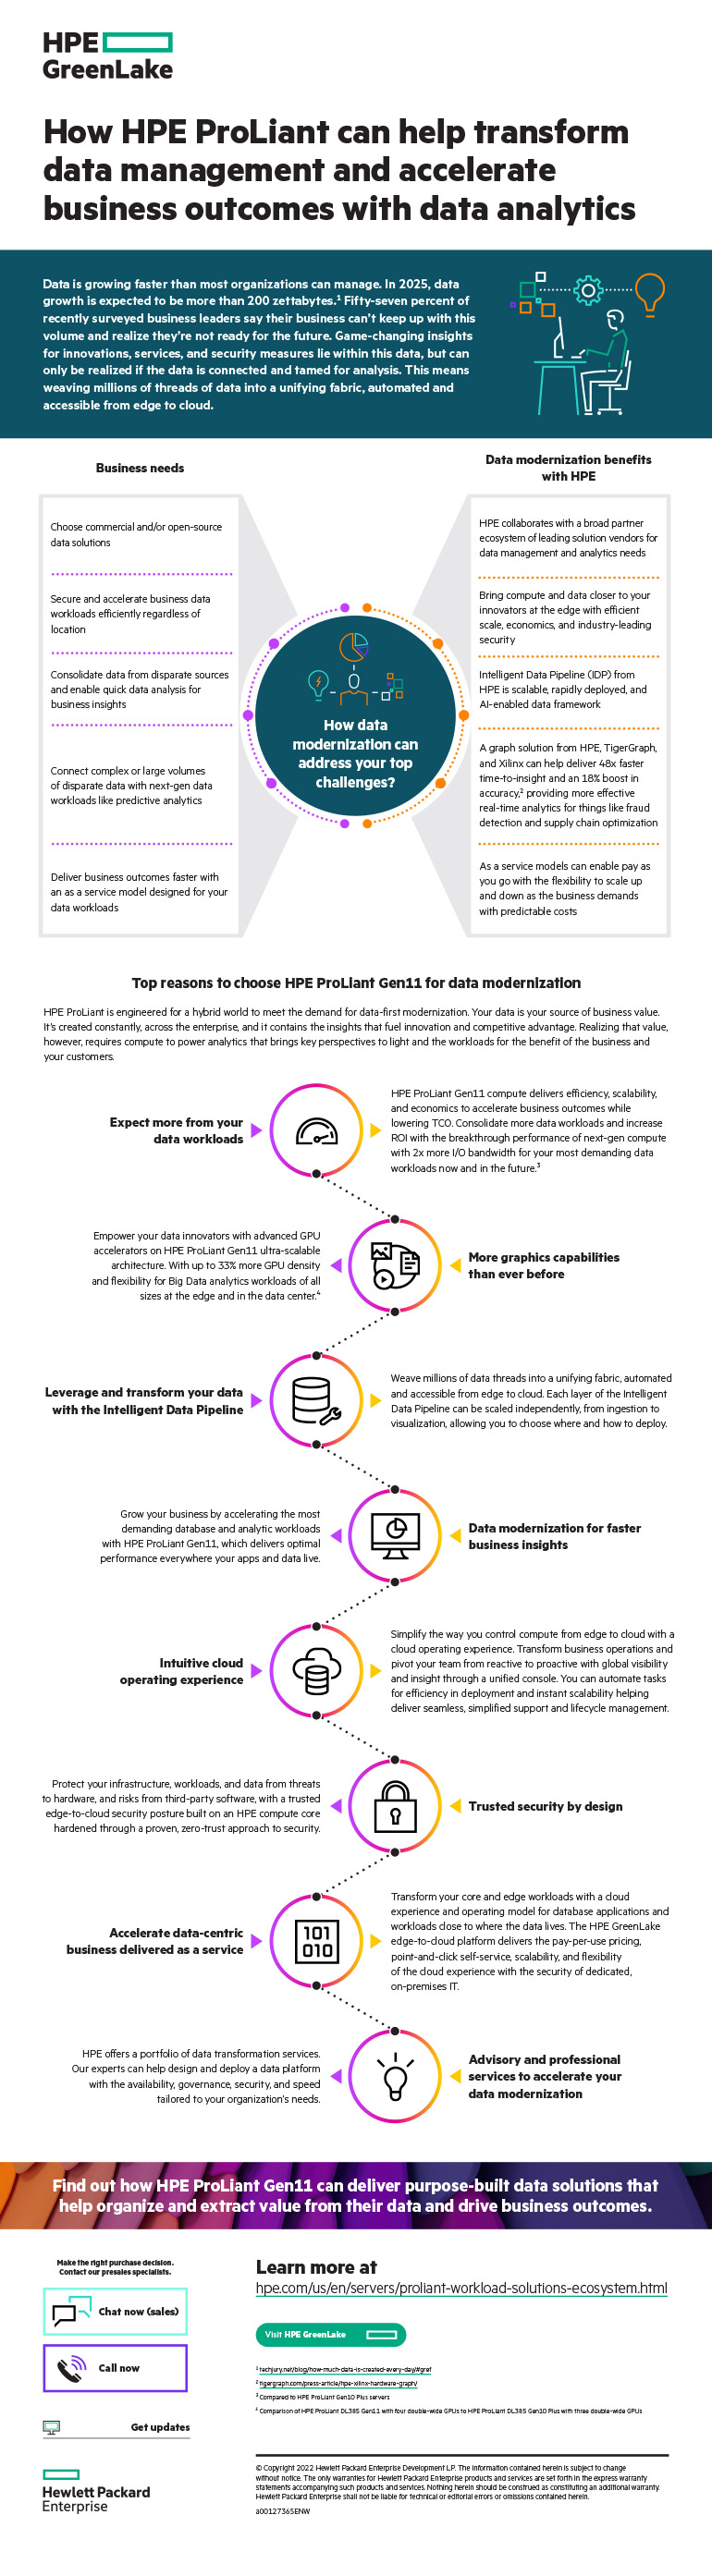 How HPE ProLiant Can Help Transform Data Management and Accelerate Business Outcomes with Data Analytics infographic